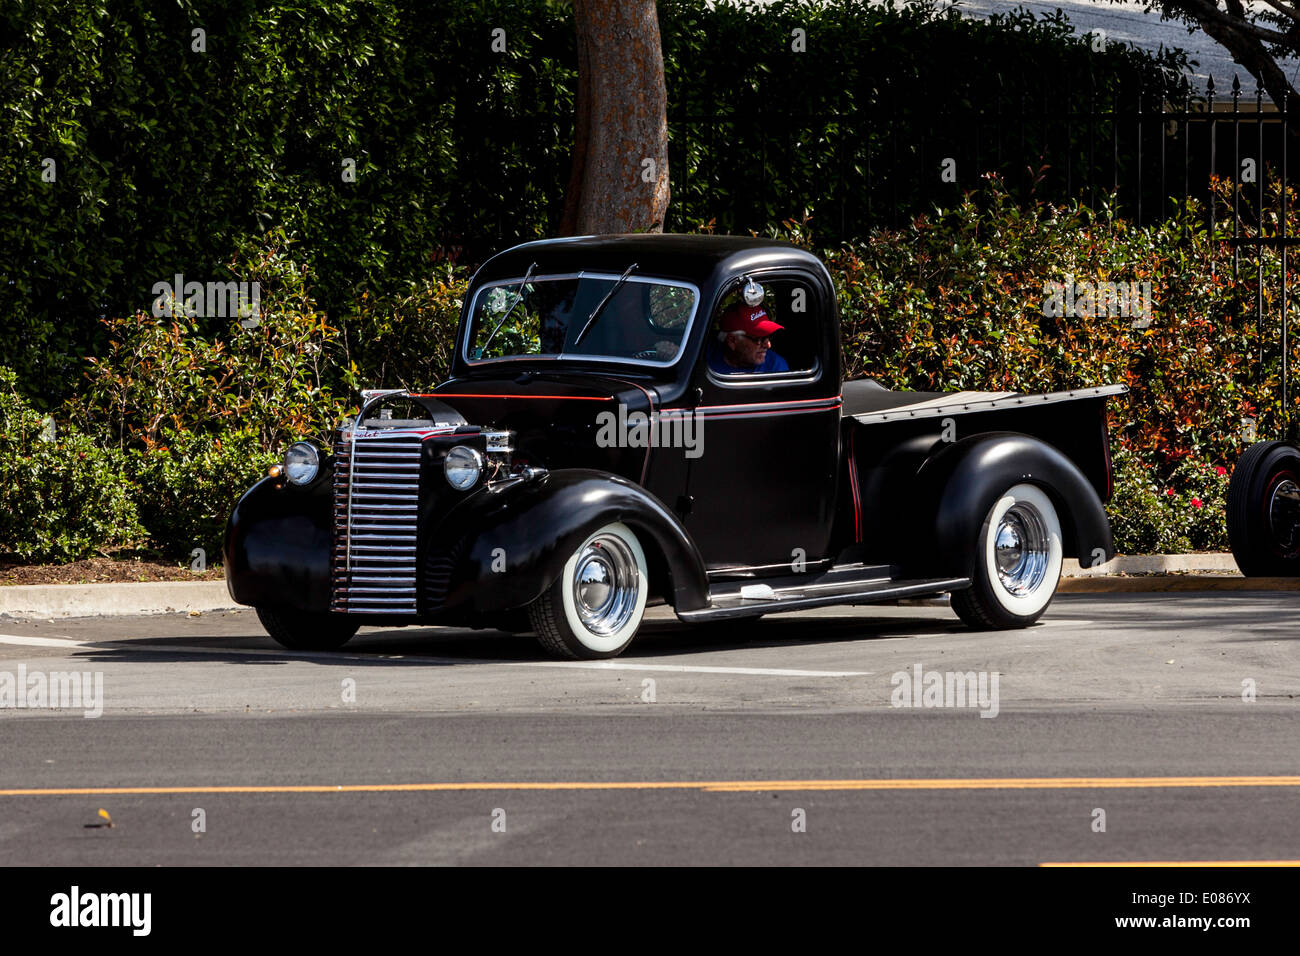 A 1939 Chevy Truck Stock Photo